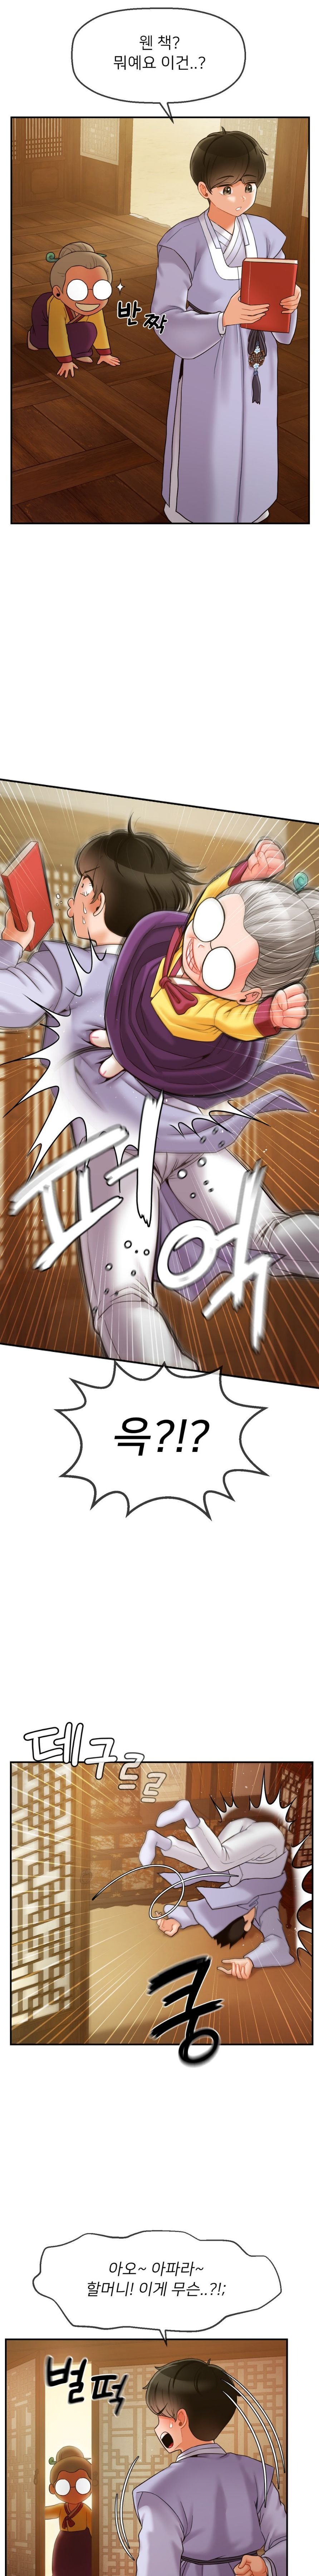 seventeenth-only-son-raw-chap-3-11